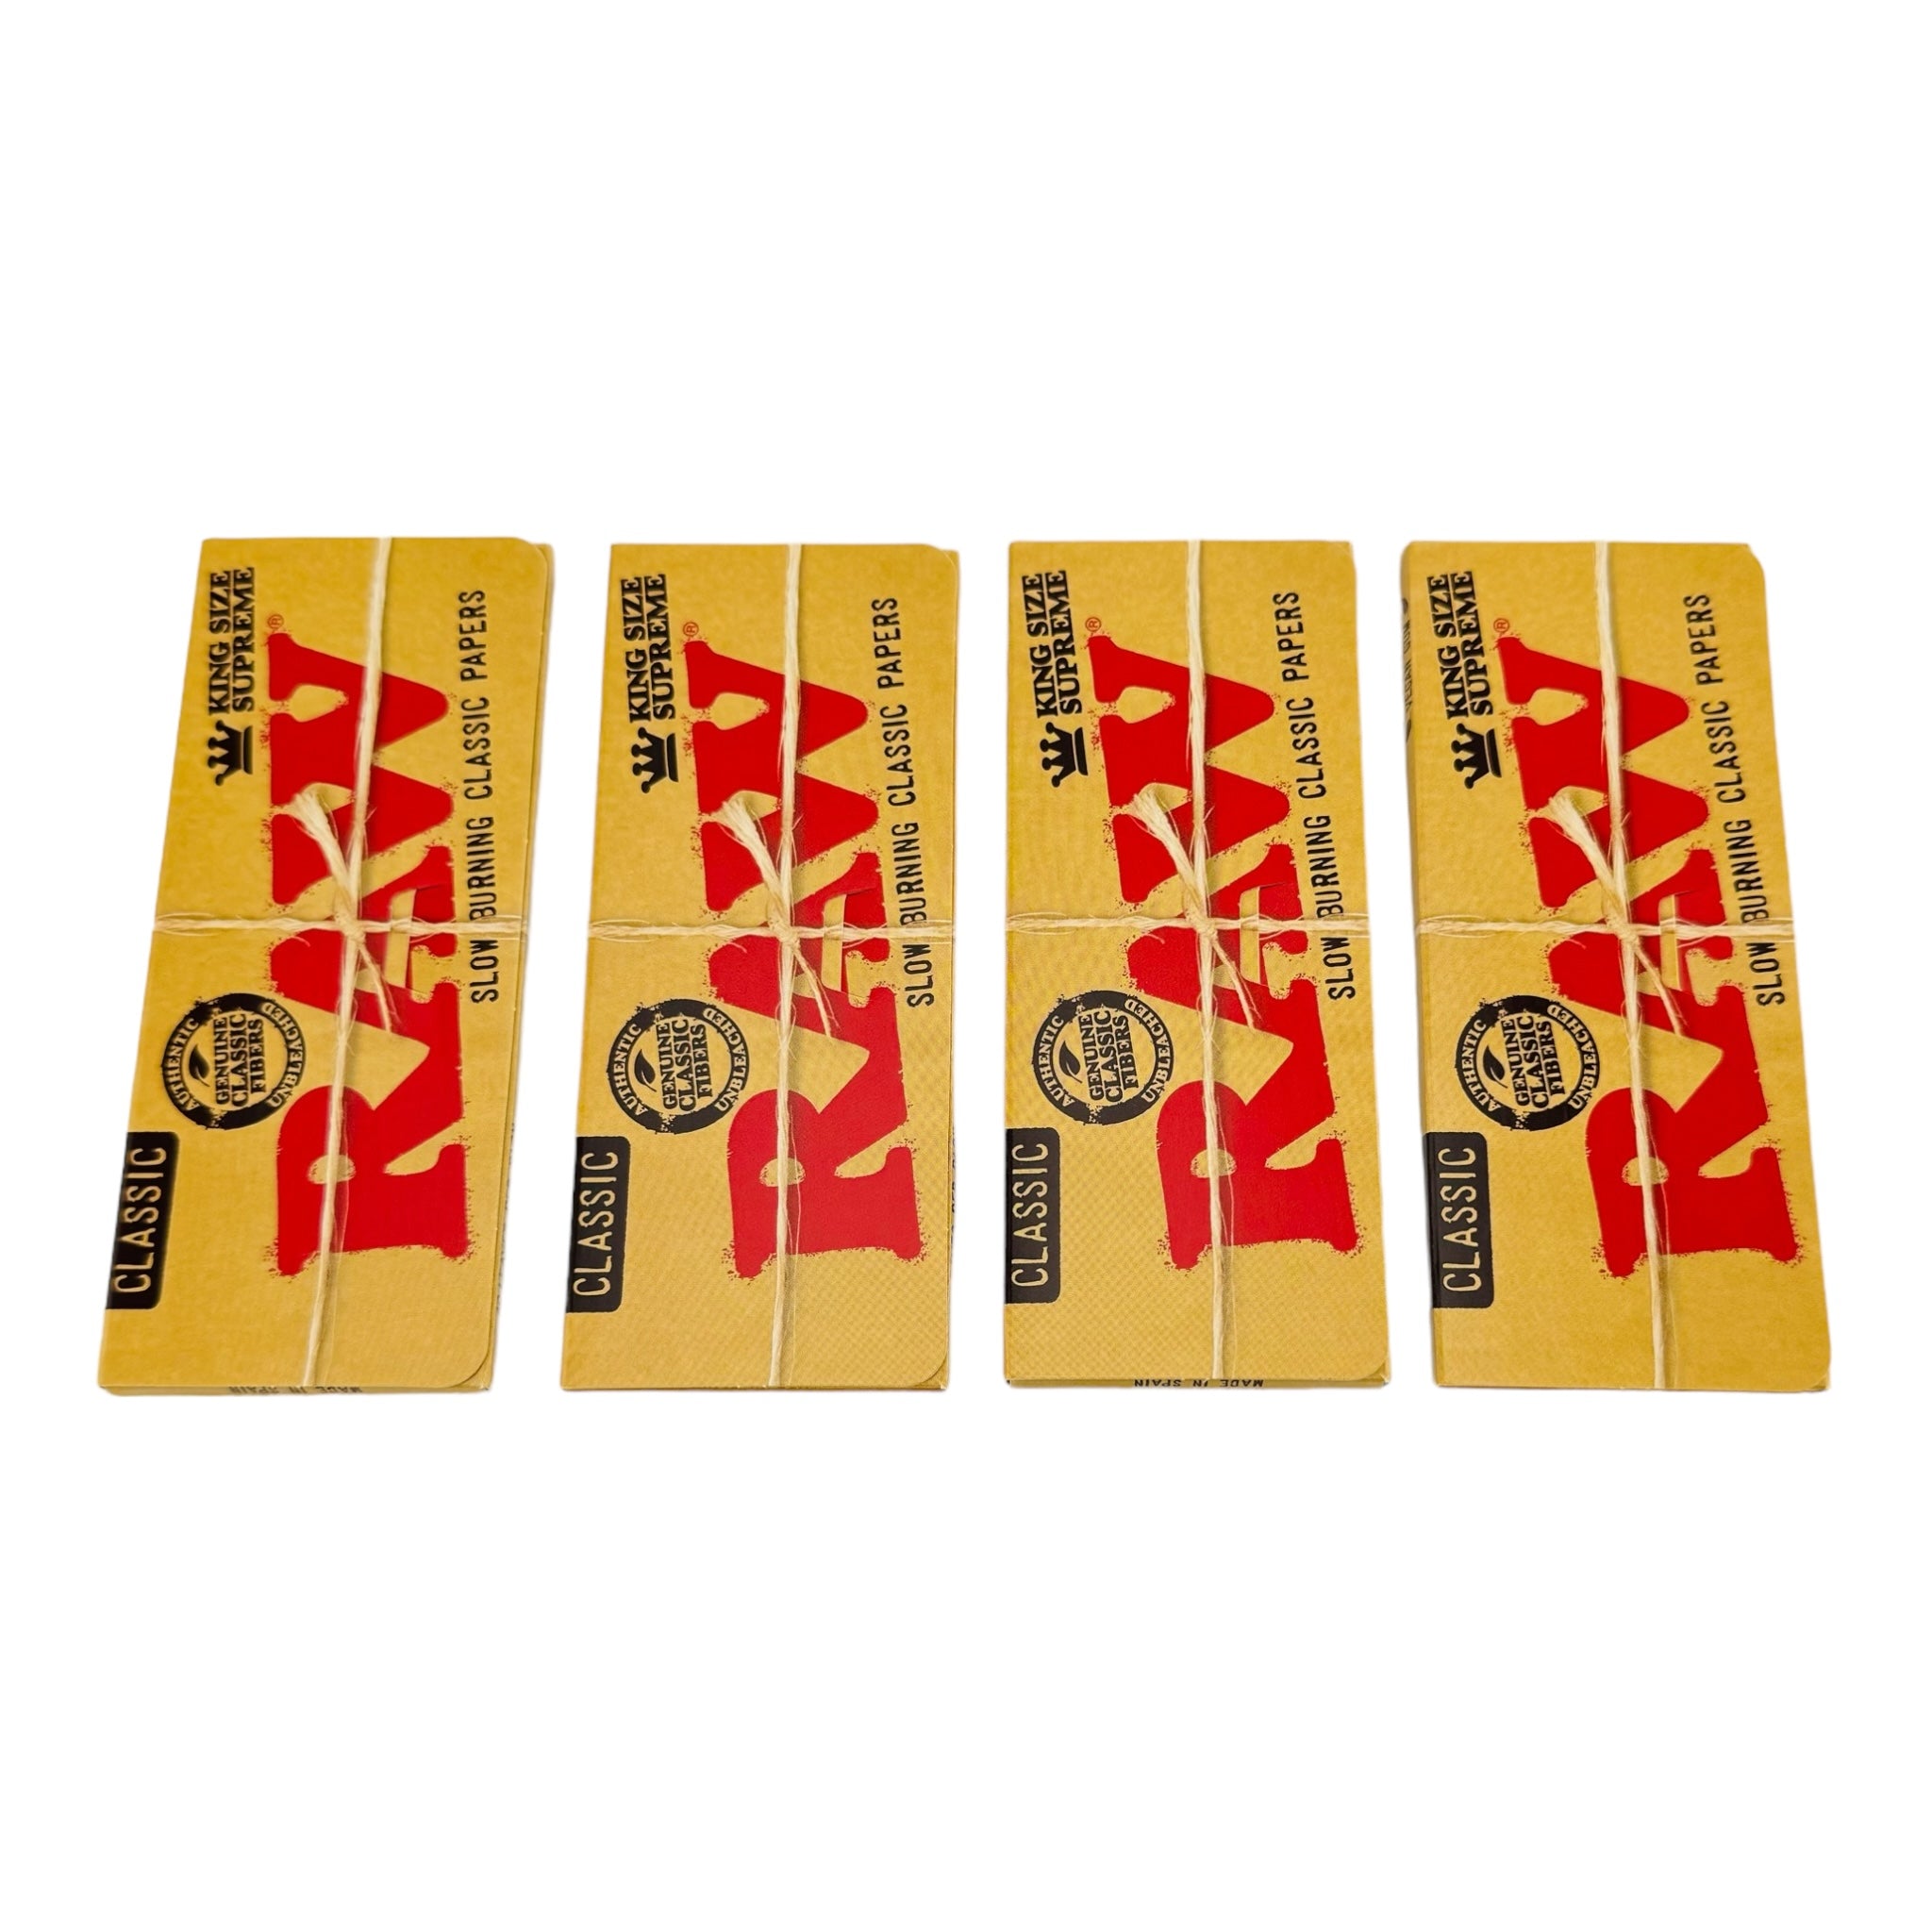 RAW Classic Hemp King Size Supreme Rolling Papers